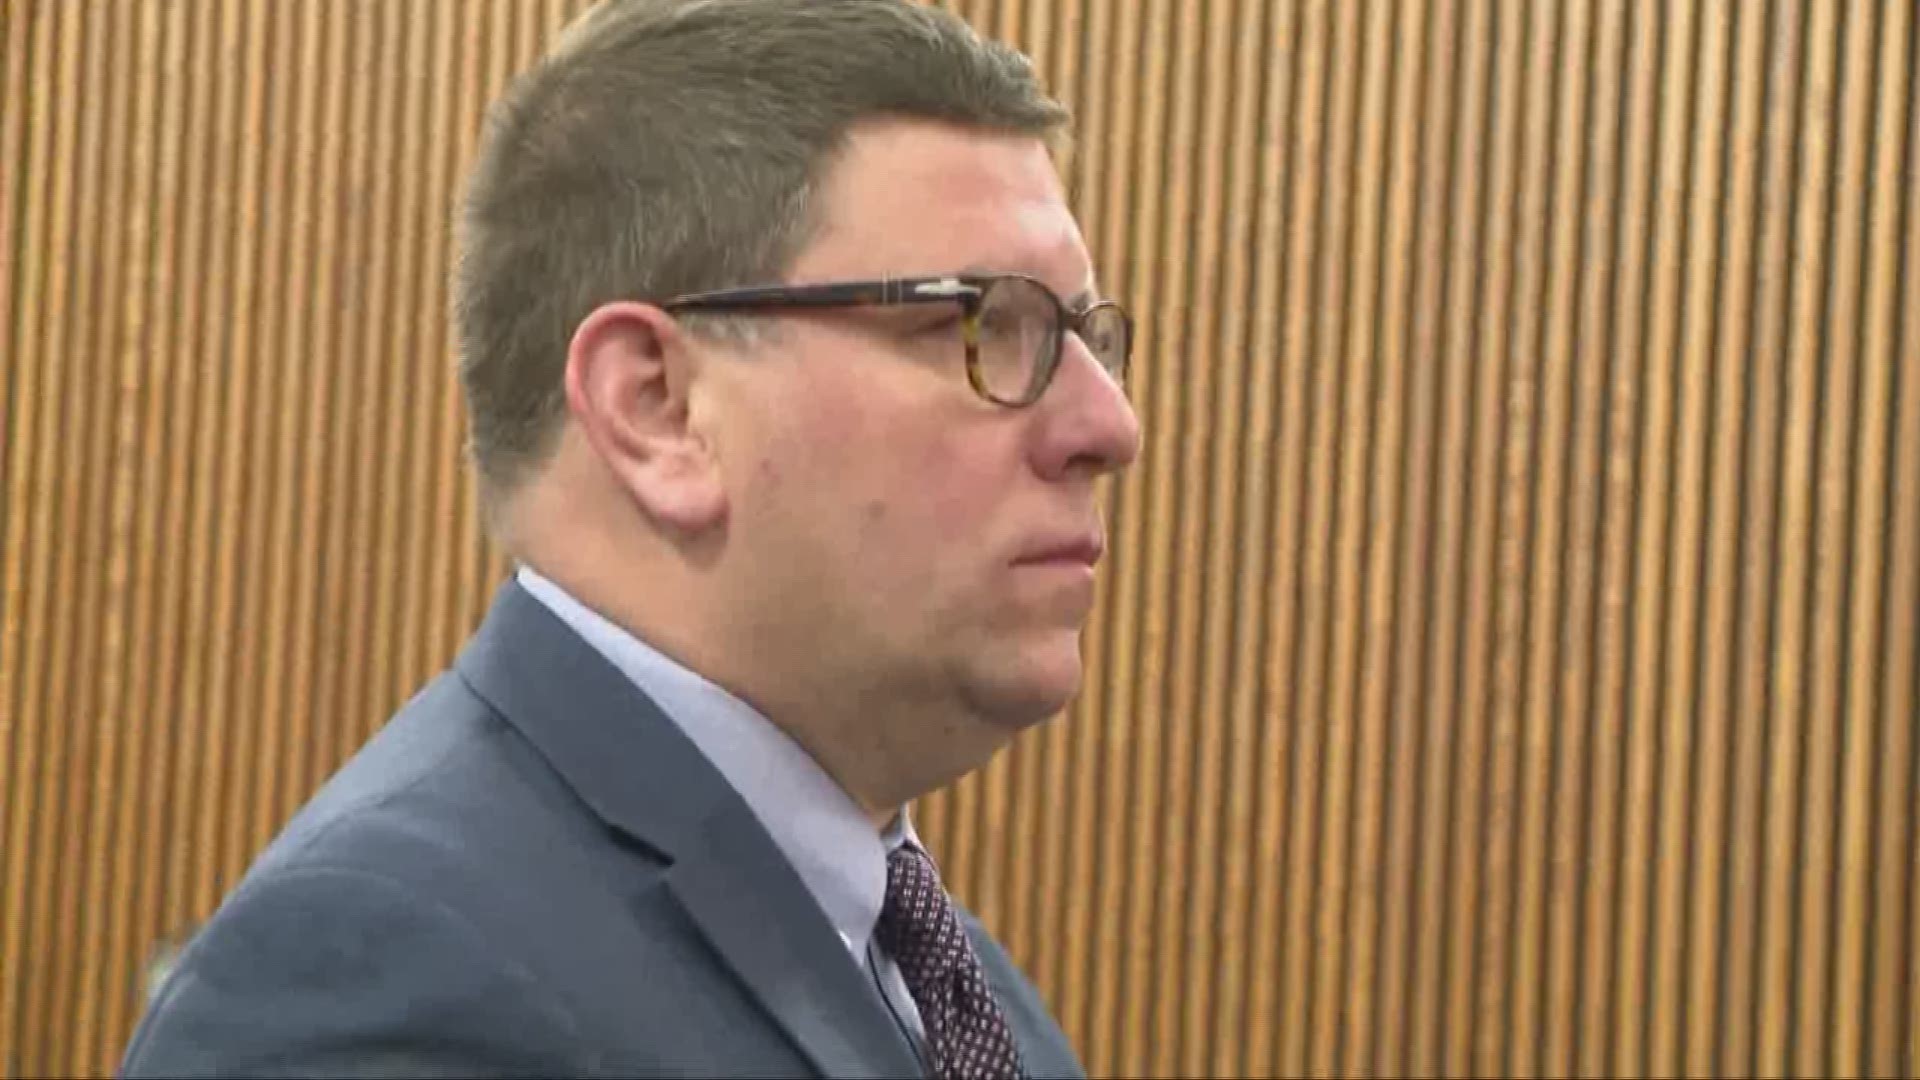 Former Cleveland Councilman Joe Cimperman pleads guilty to 26 charges